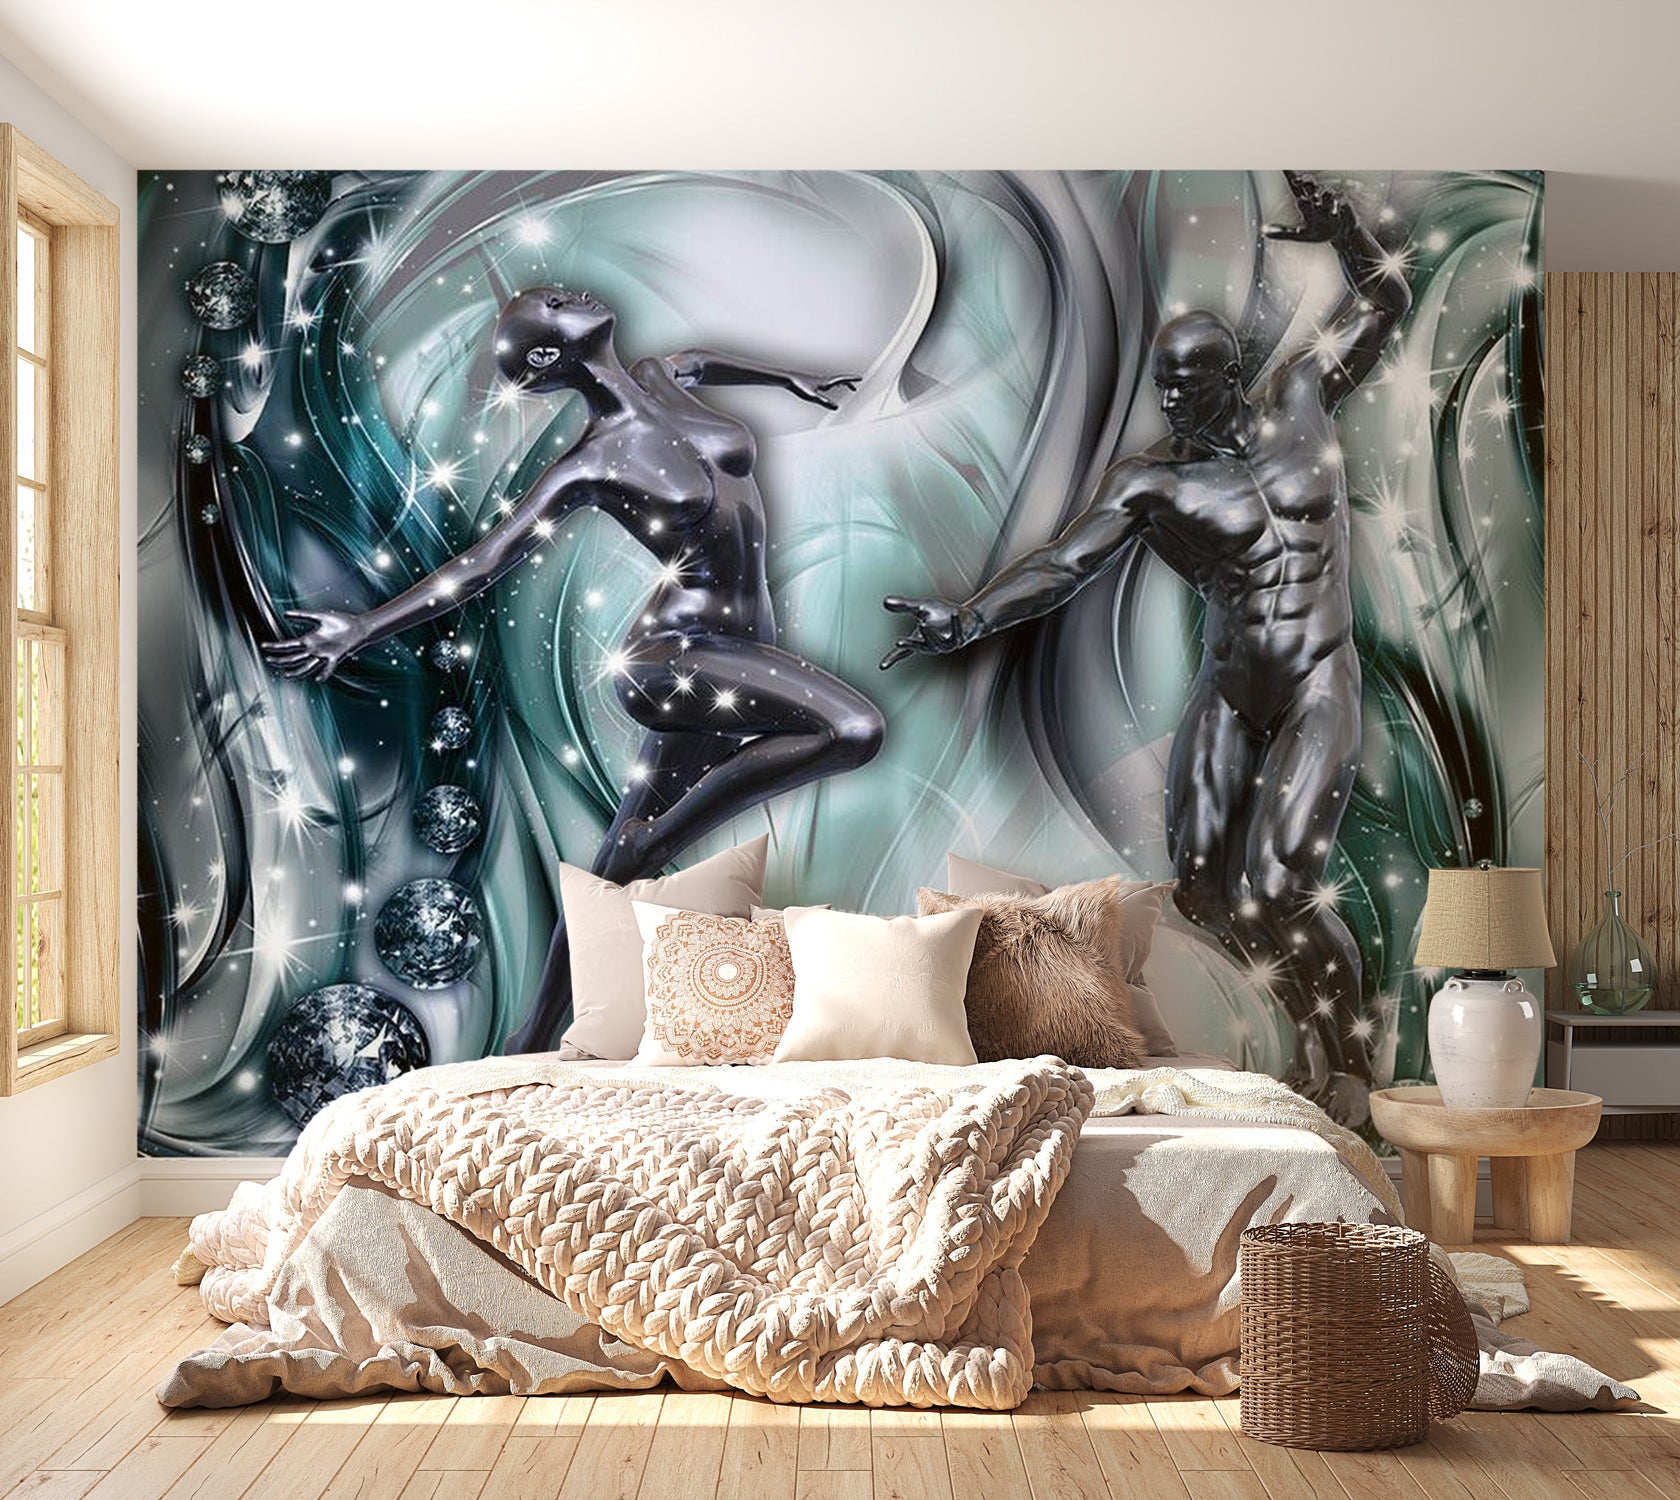 Peel & Stick Glam Wall Mural - Dance Of Senses - Removable Wall Decals